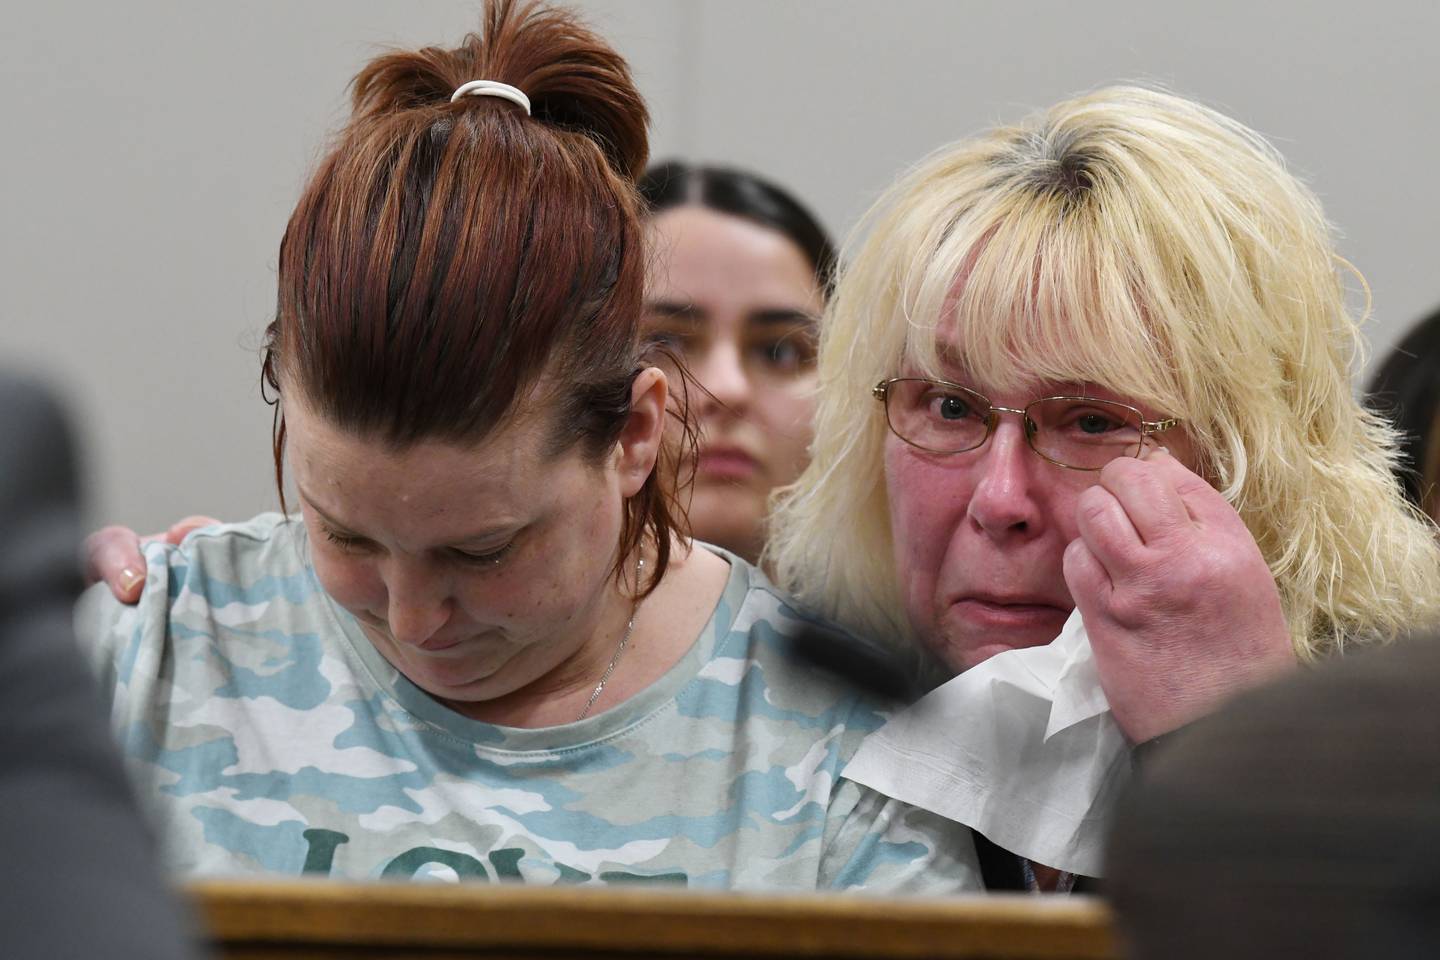 Peggy Lynn Johnson-Schroeder's sister Spring Leslin, left, and aunt Ginny Schroeder react after Linda La Roche is found guilty Wednesday, March 16, 2022, on both counts by a Racine County jury. La Roche, formerly of the McHenry area and, before her arrest in 2019, Florida, was charged with first-degree intentional homicide and hiding a body in the 1999 slaying of Peggy Lynn Johnson-Schroeder.